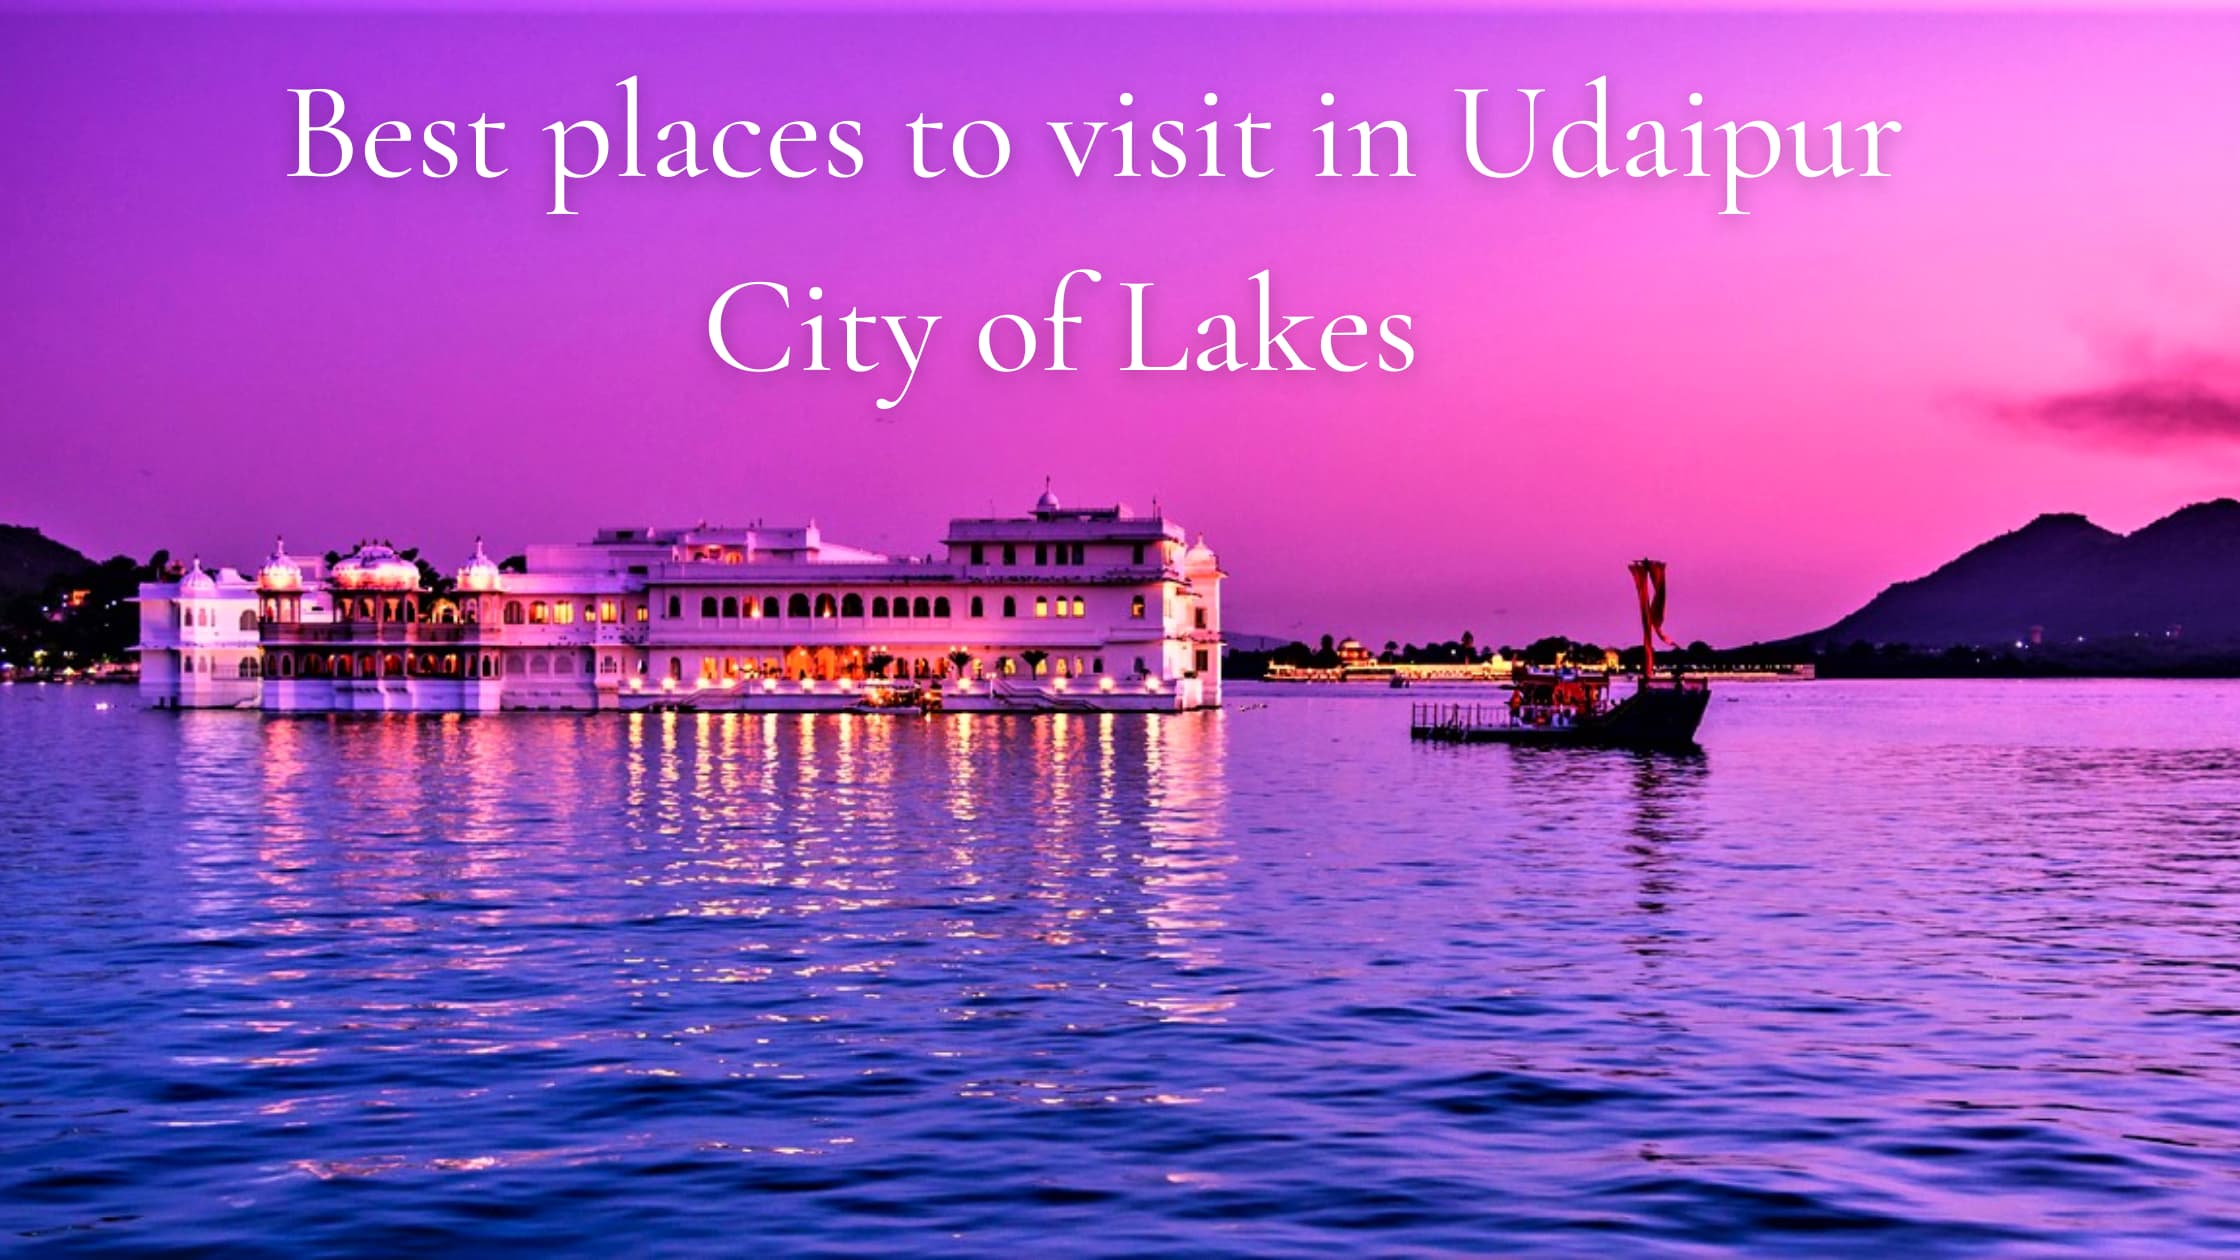 Best places t visit in Udaipur, city of Lakes